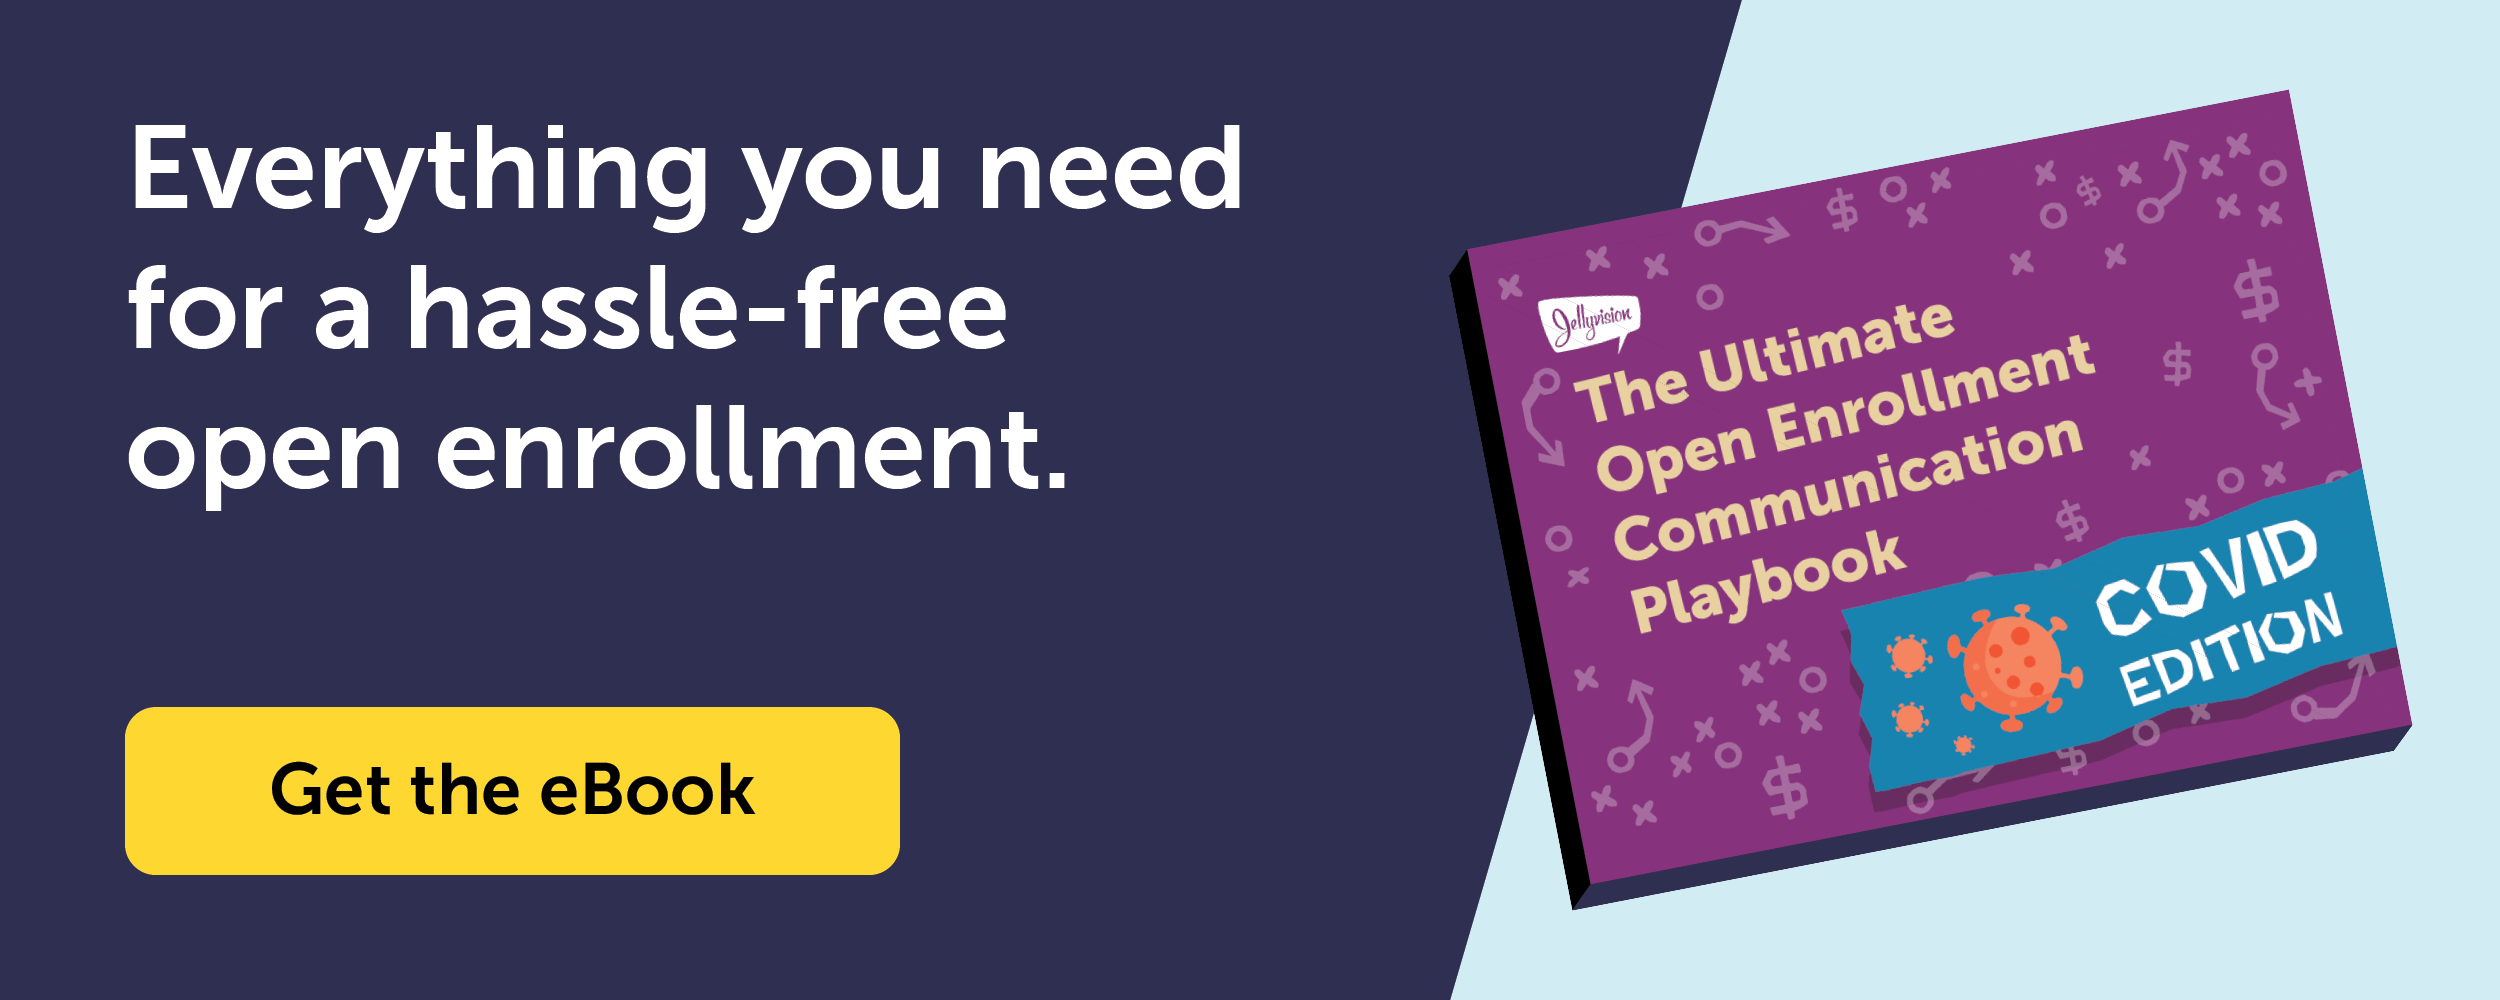 The Ultimate Open Enrollment Communication Playbook: COVID Edition